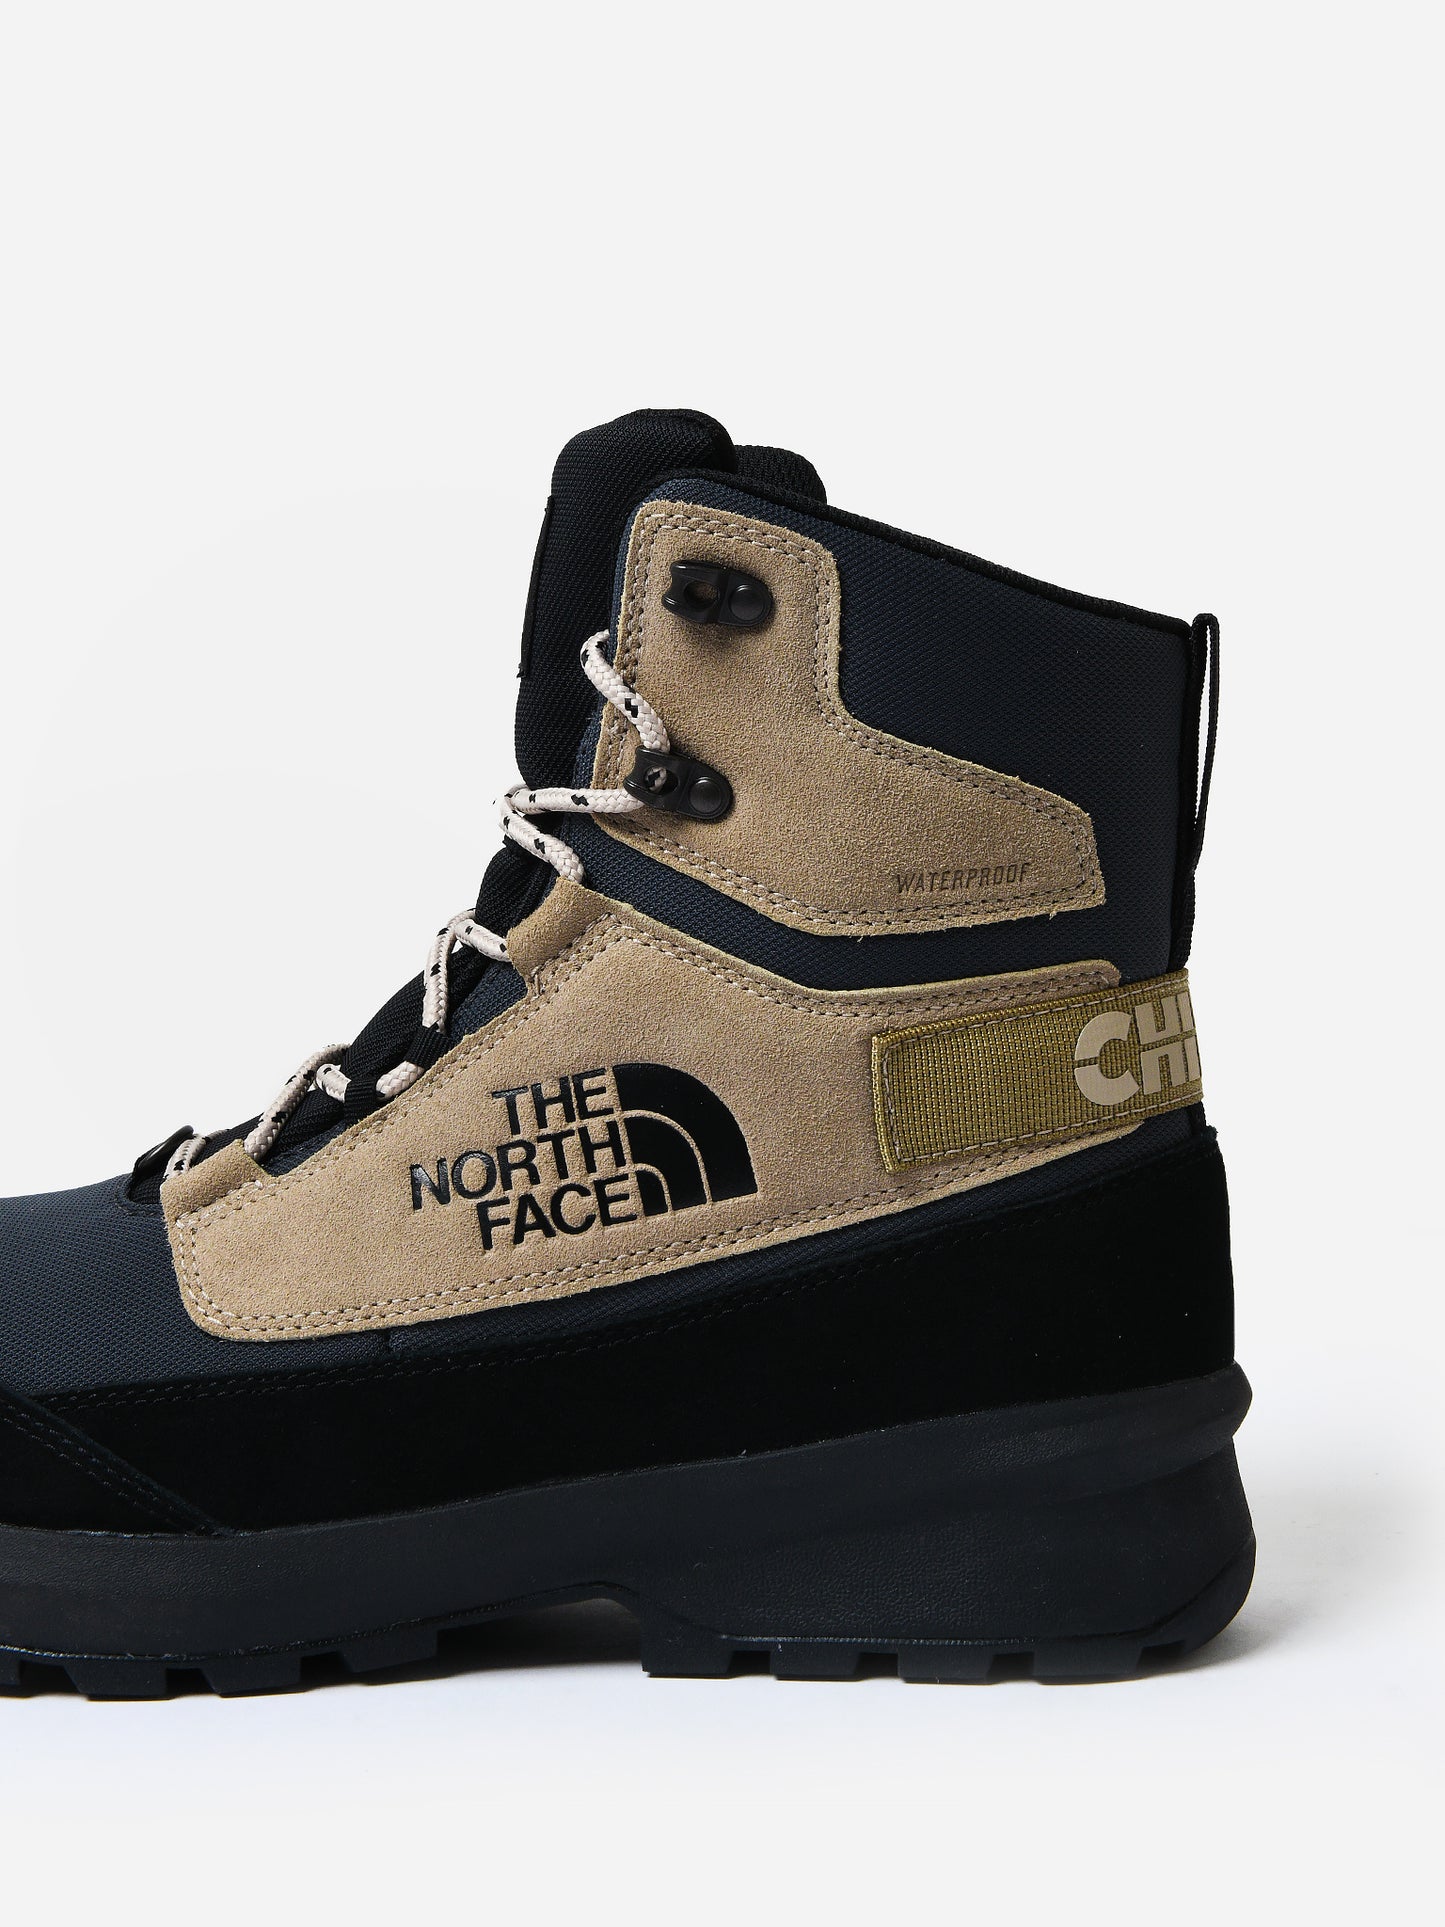 The North Face Men’s Chilkat V Cognito Waterproof Boots